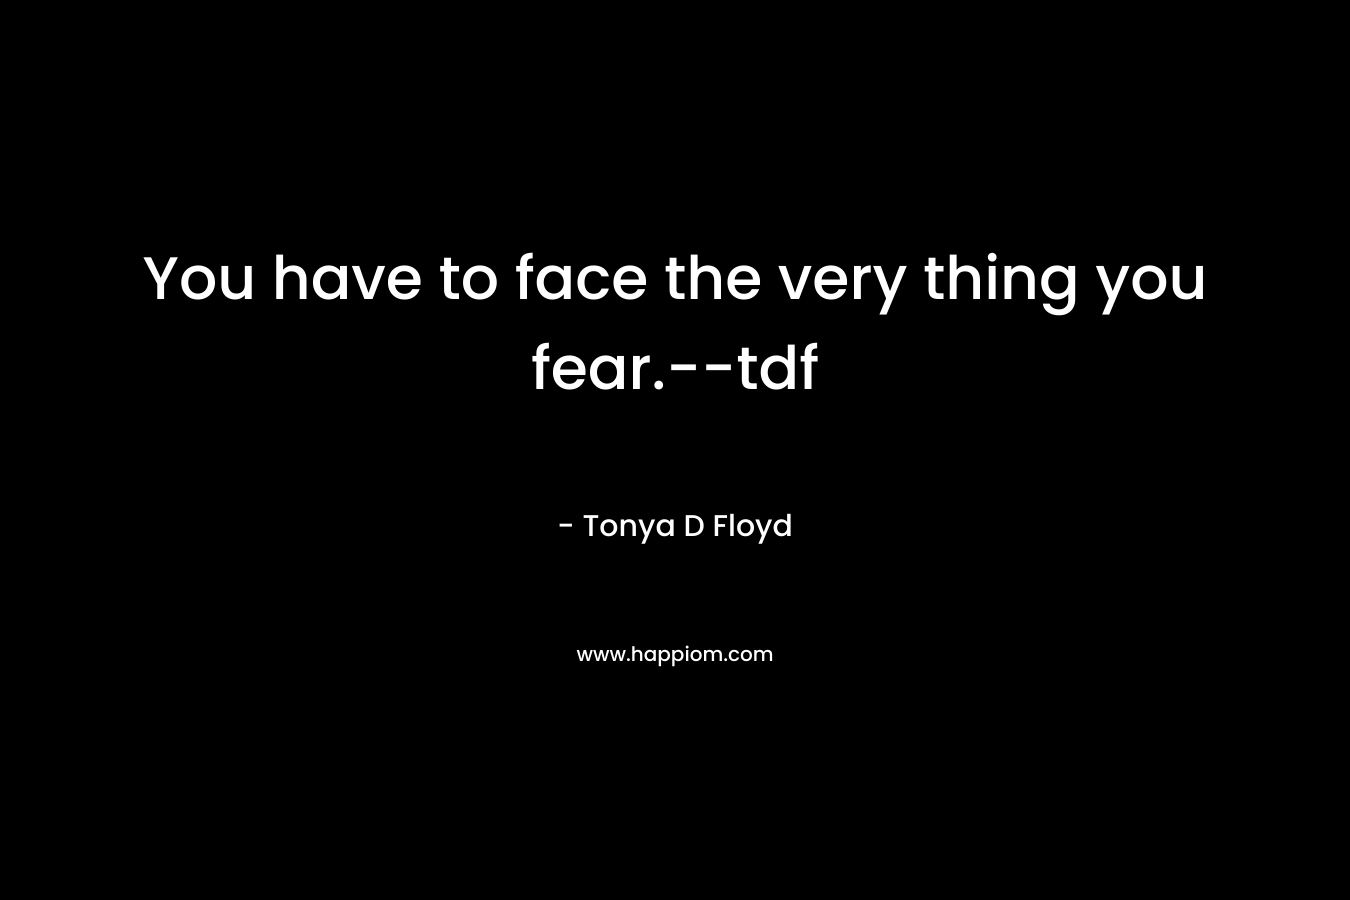 You have to face the very thing you fear.--tdf